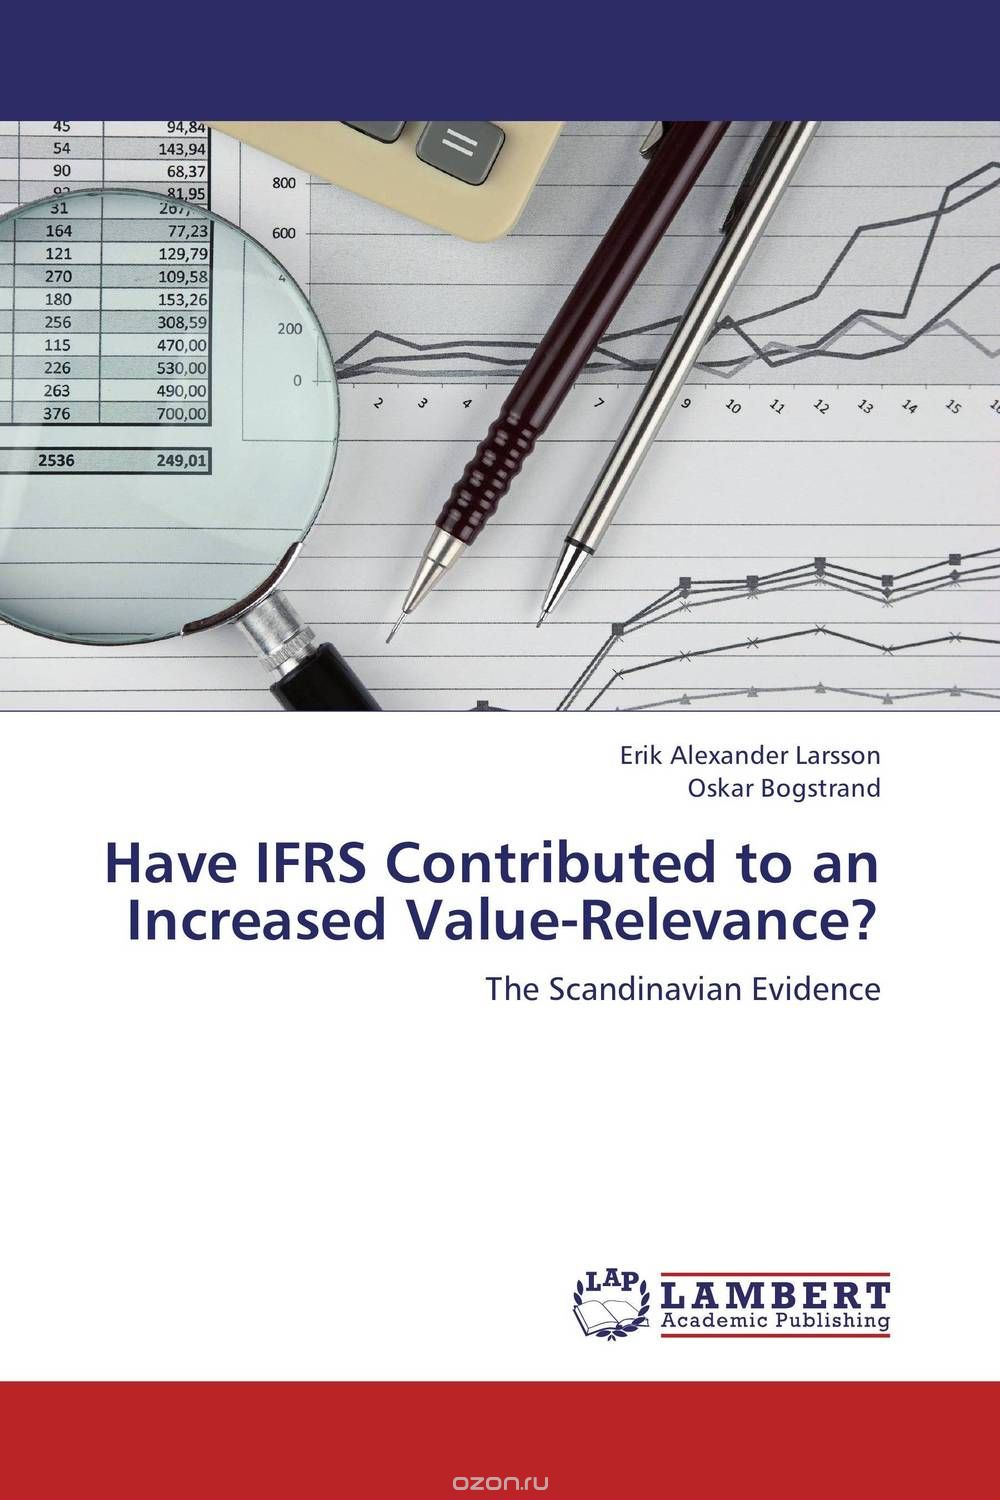 Скачать книгу "Have IFRS Contributed to an Increased Value-Relevance?"